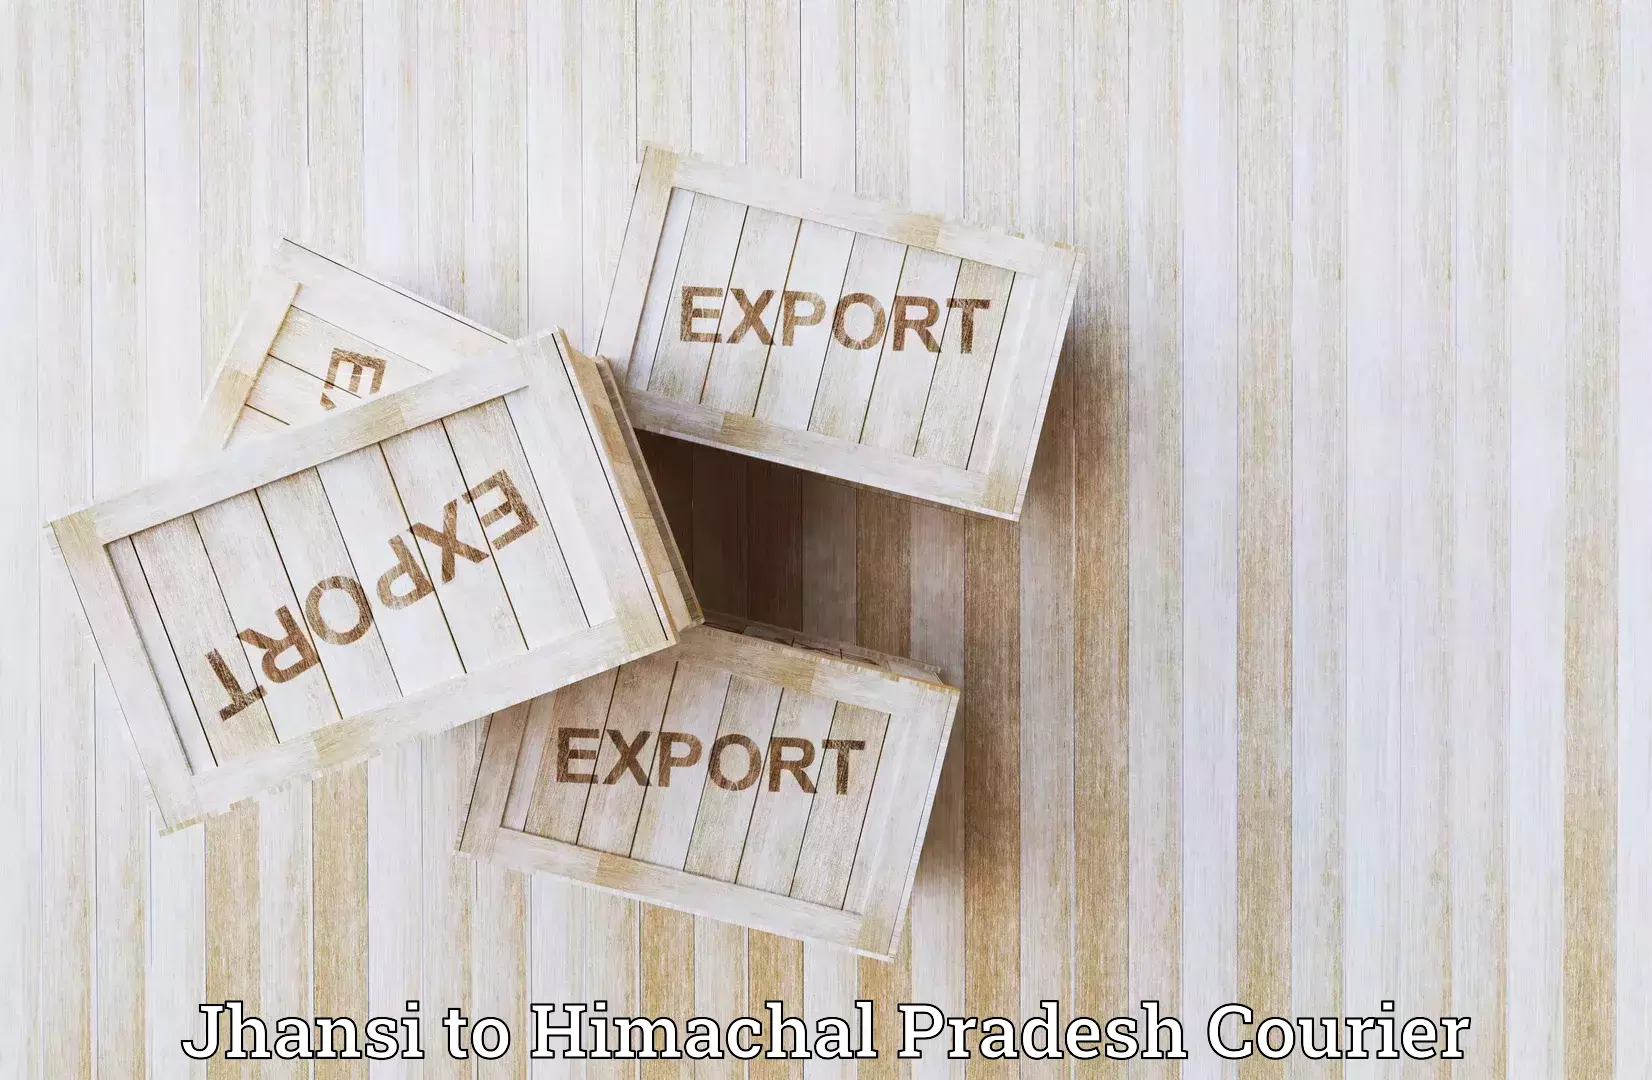 Customized shipping options Jhansi to Darlaghat